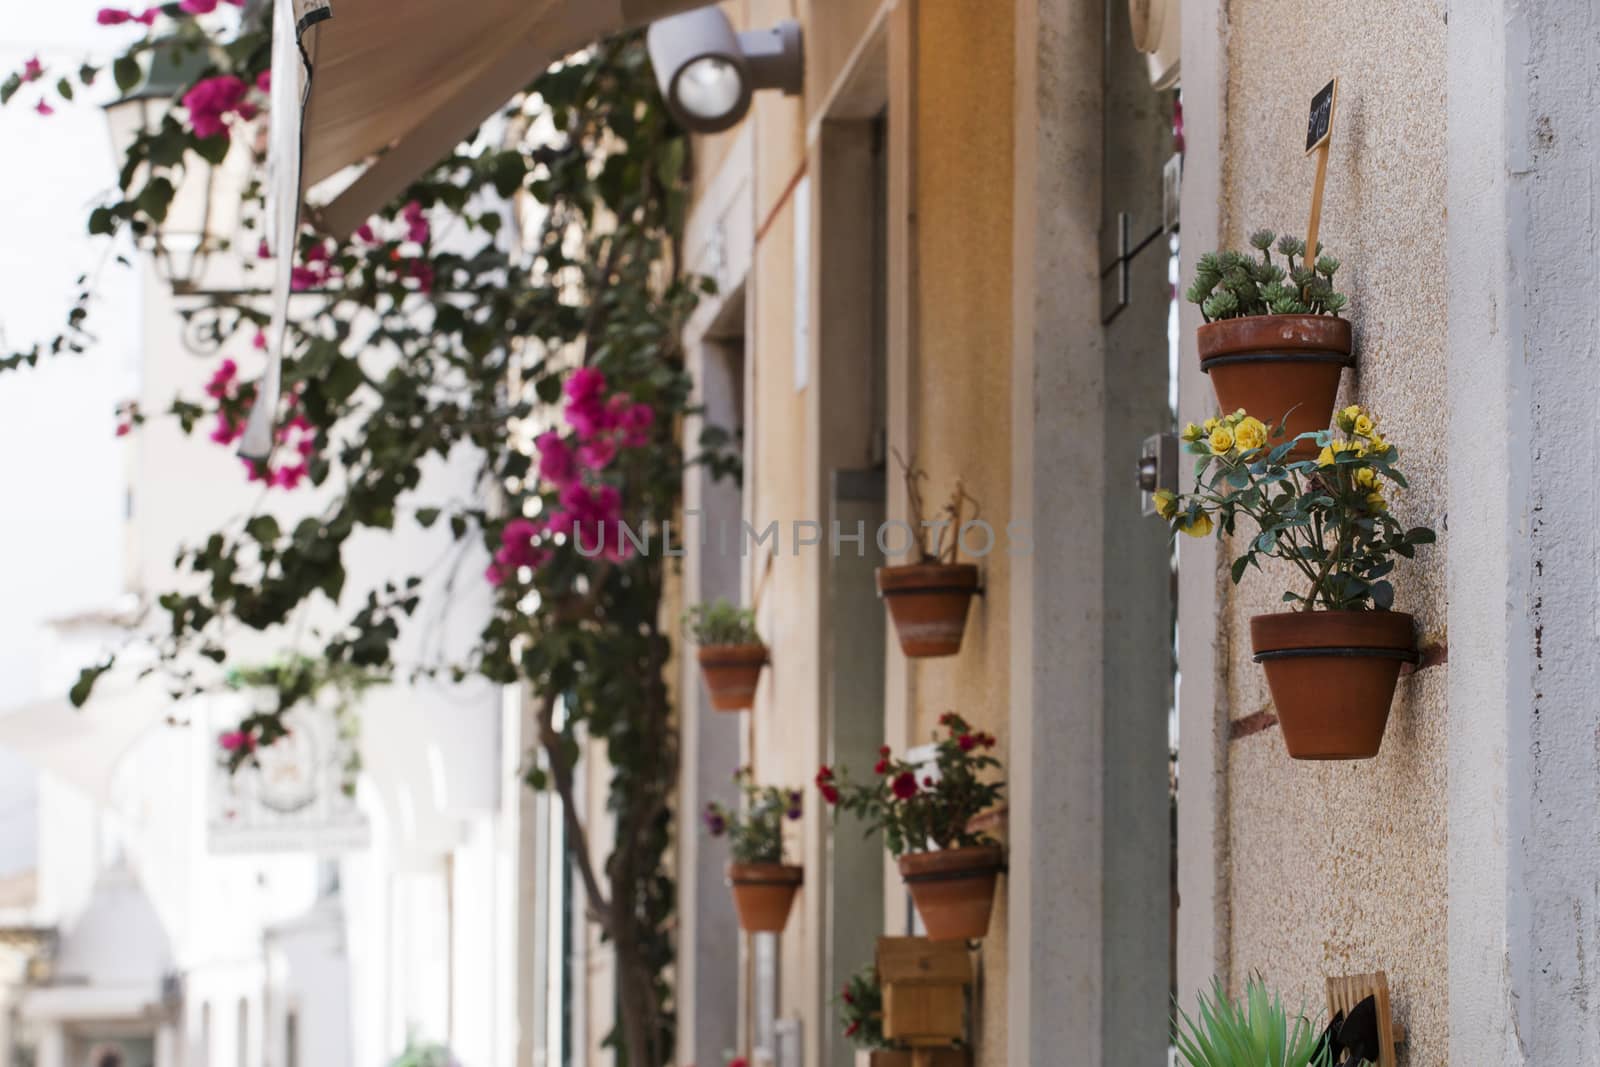 Decorative flower vases on the street by membio